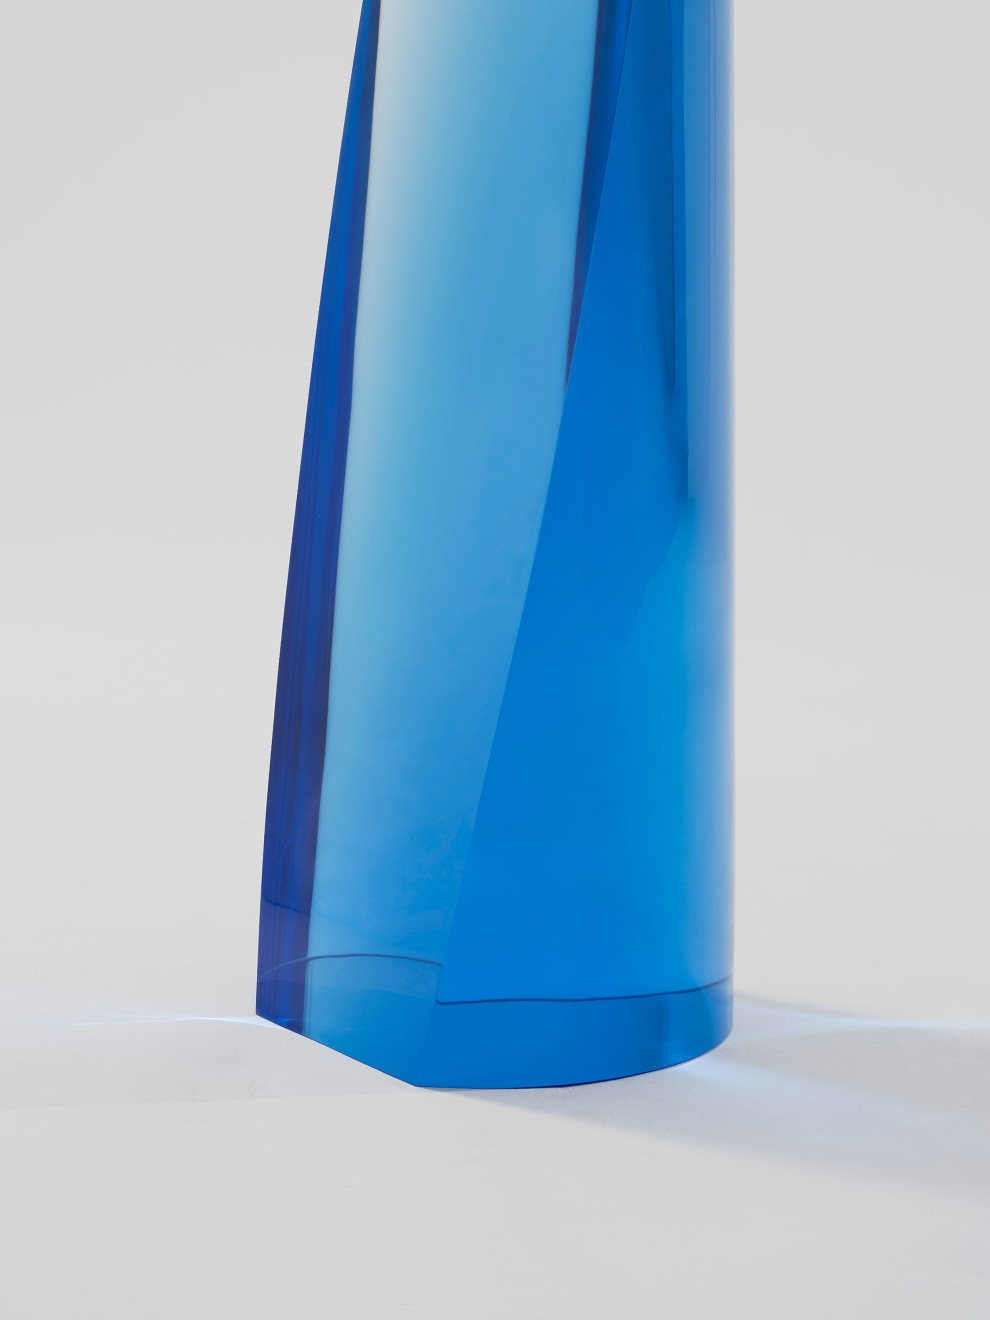 Fred Eversley, Untitled (cylindrical lens), 2023